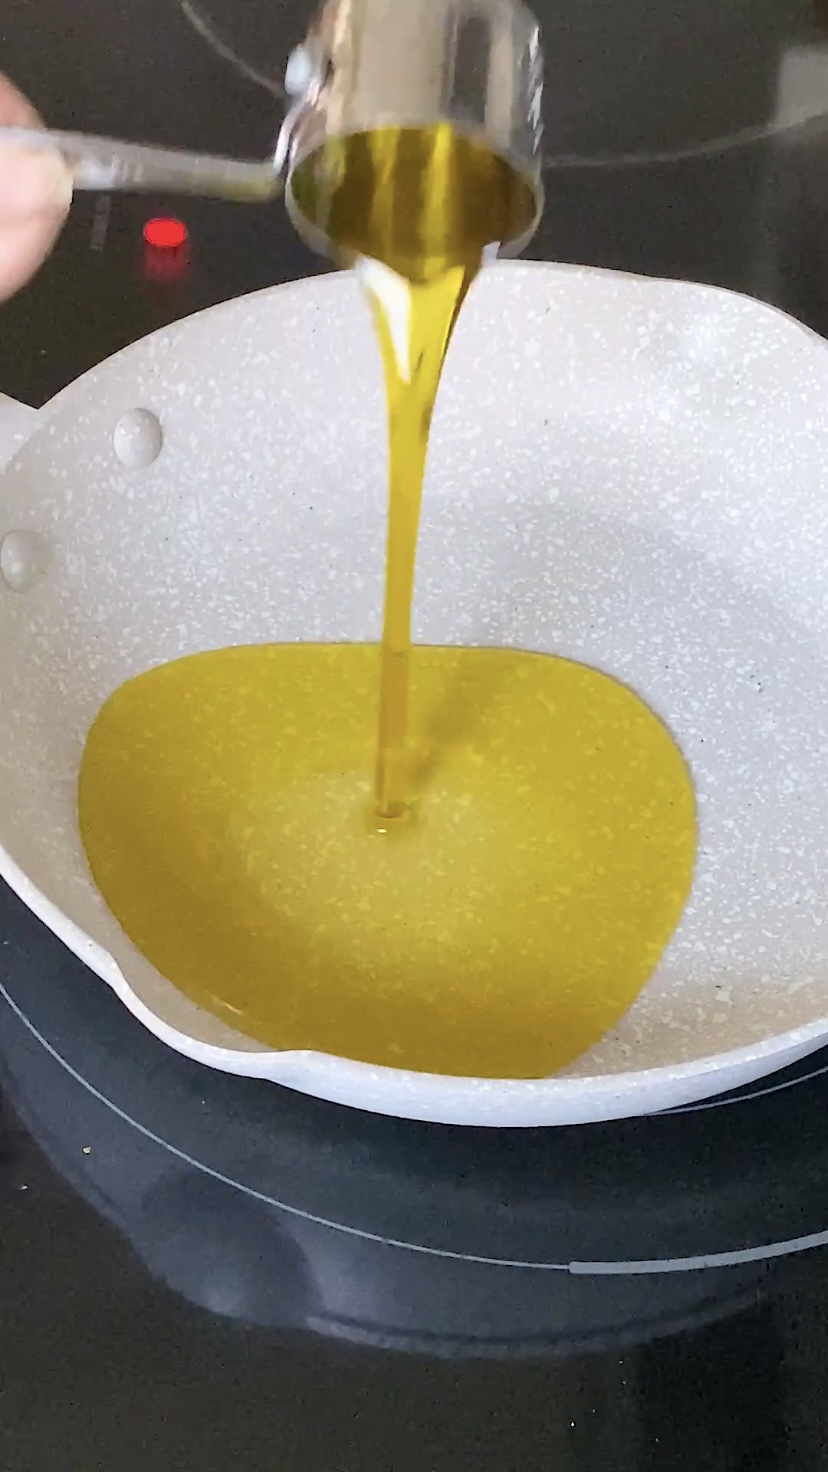 Pouring olive oil into a skillet.